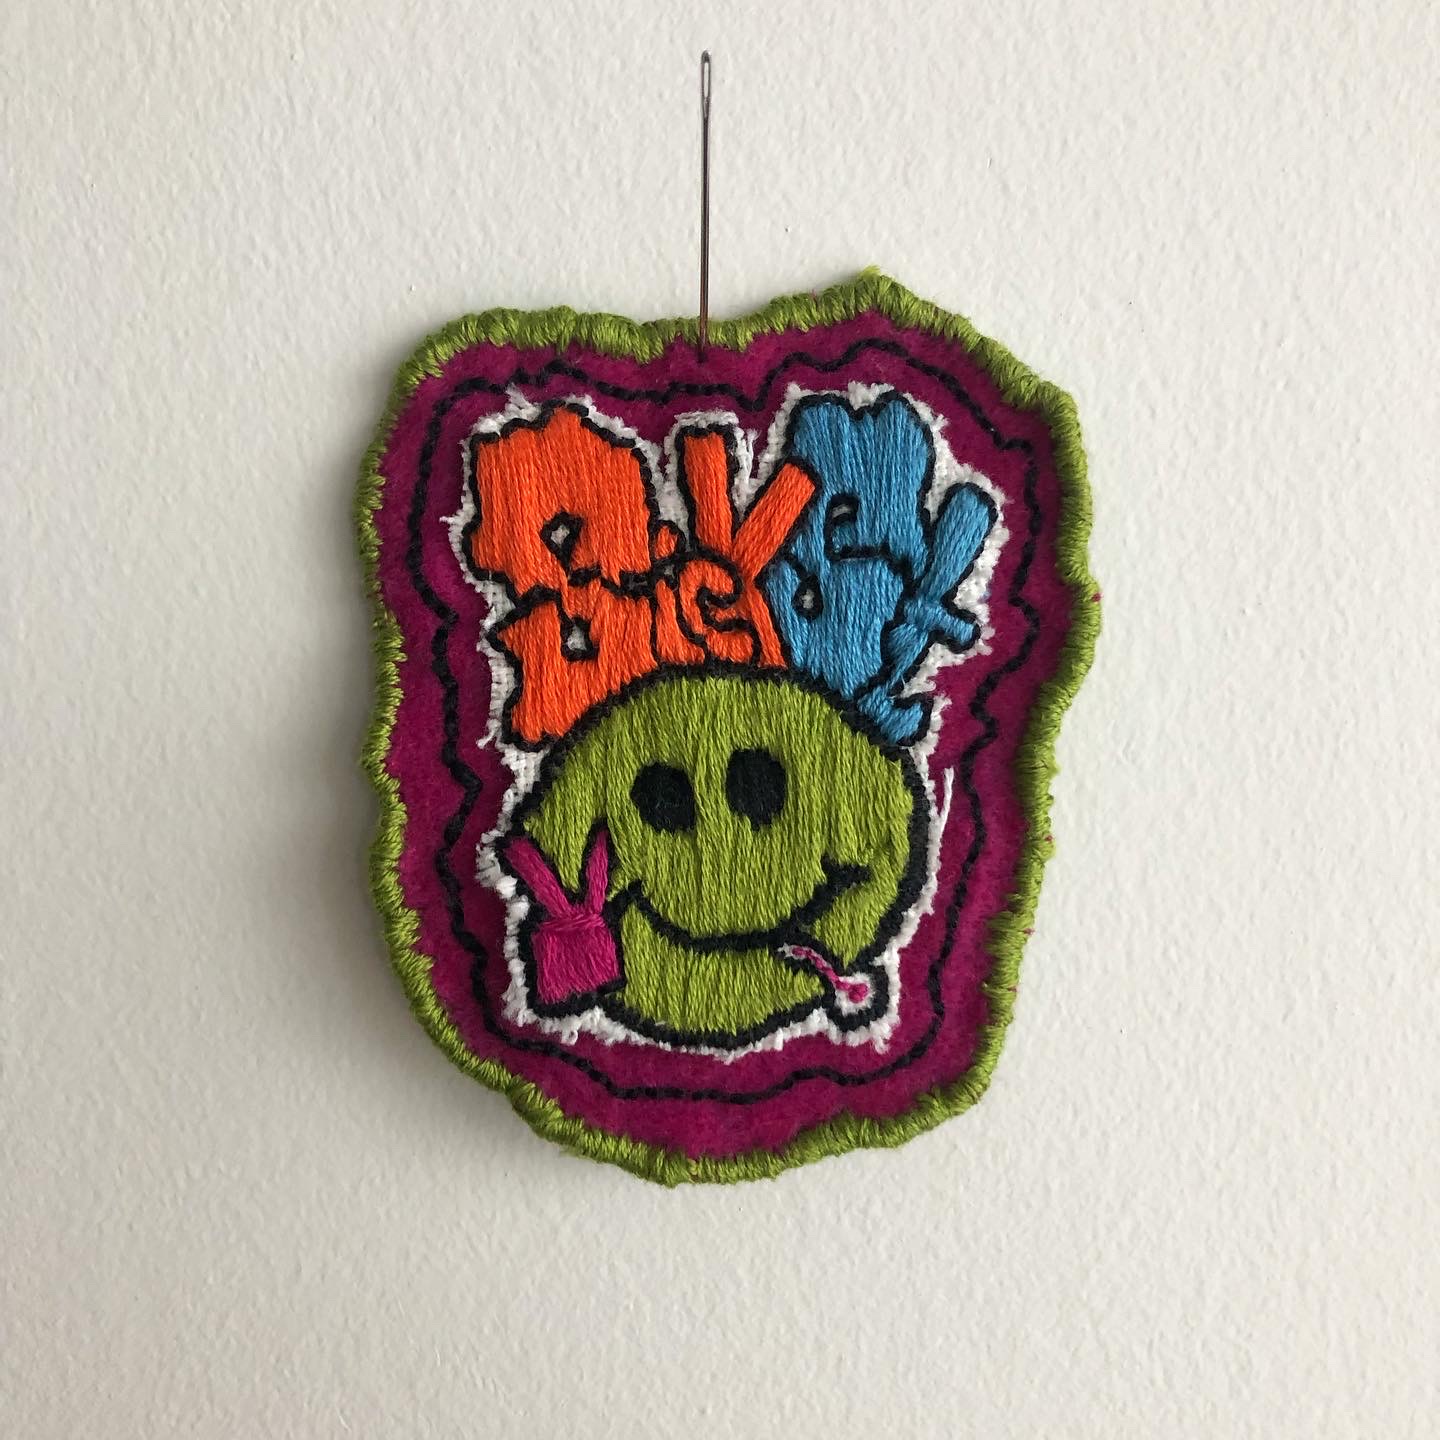 Sick St. Merchandise sample: The Patch. Hand Embroidered logo on felt.